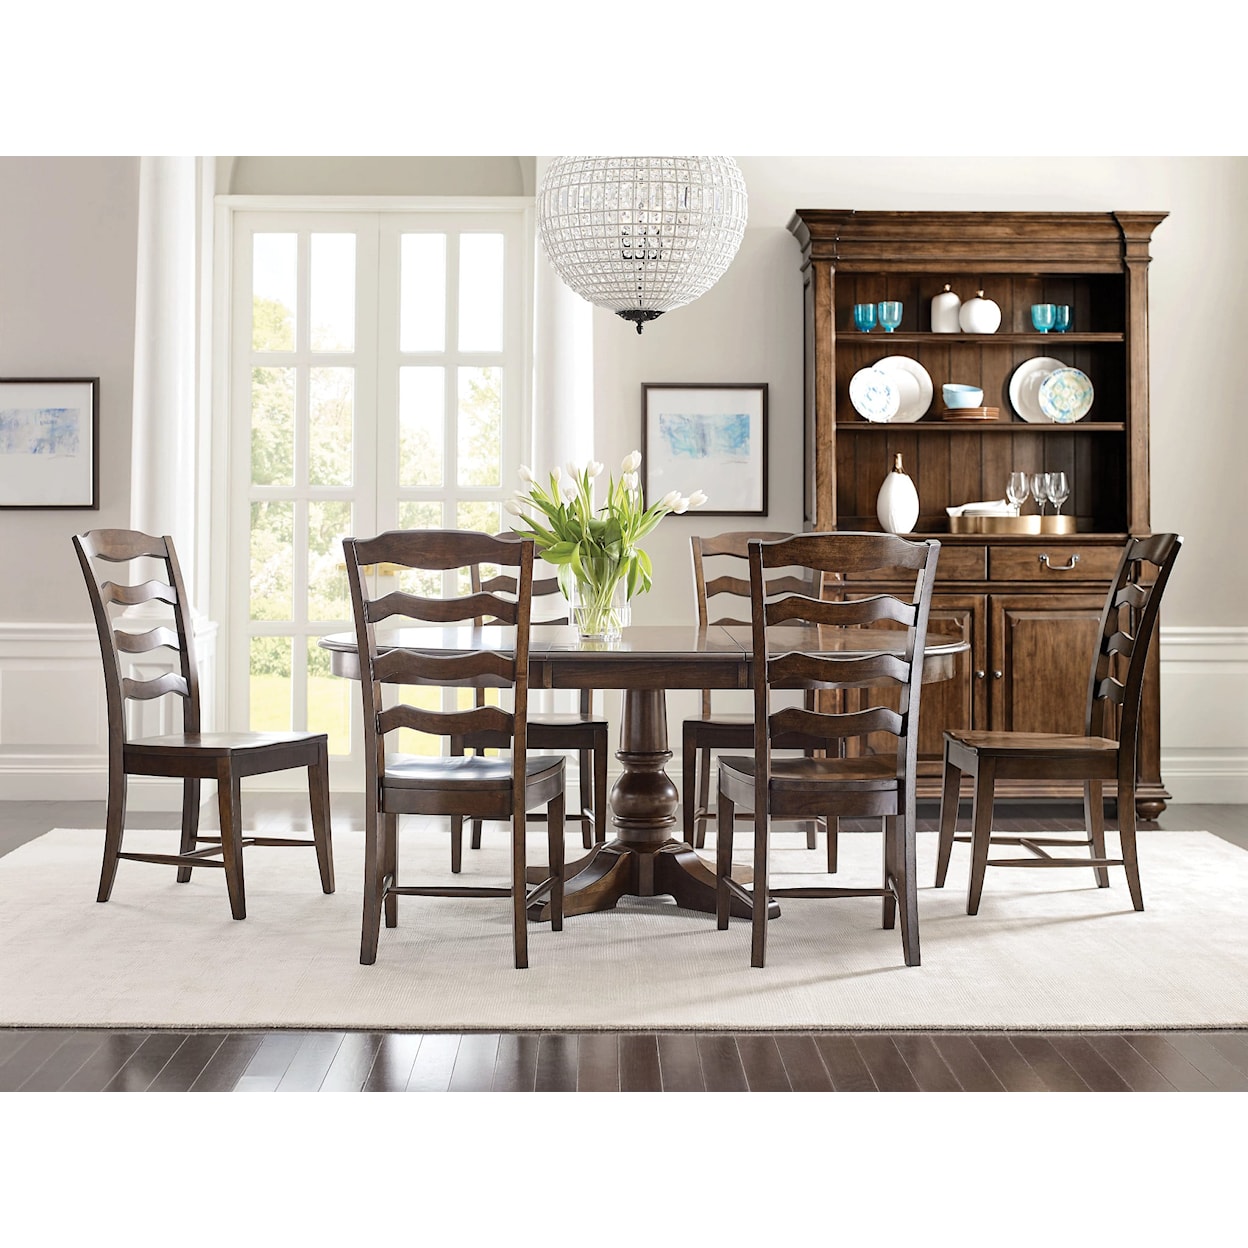 Kincaid Furniture Commonwealth Renner Side Chair